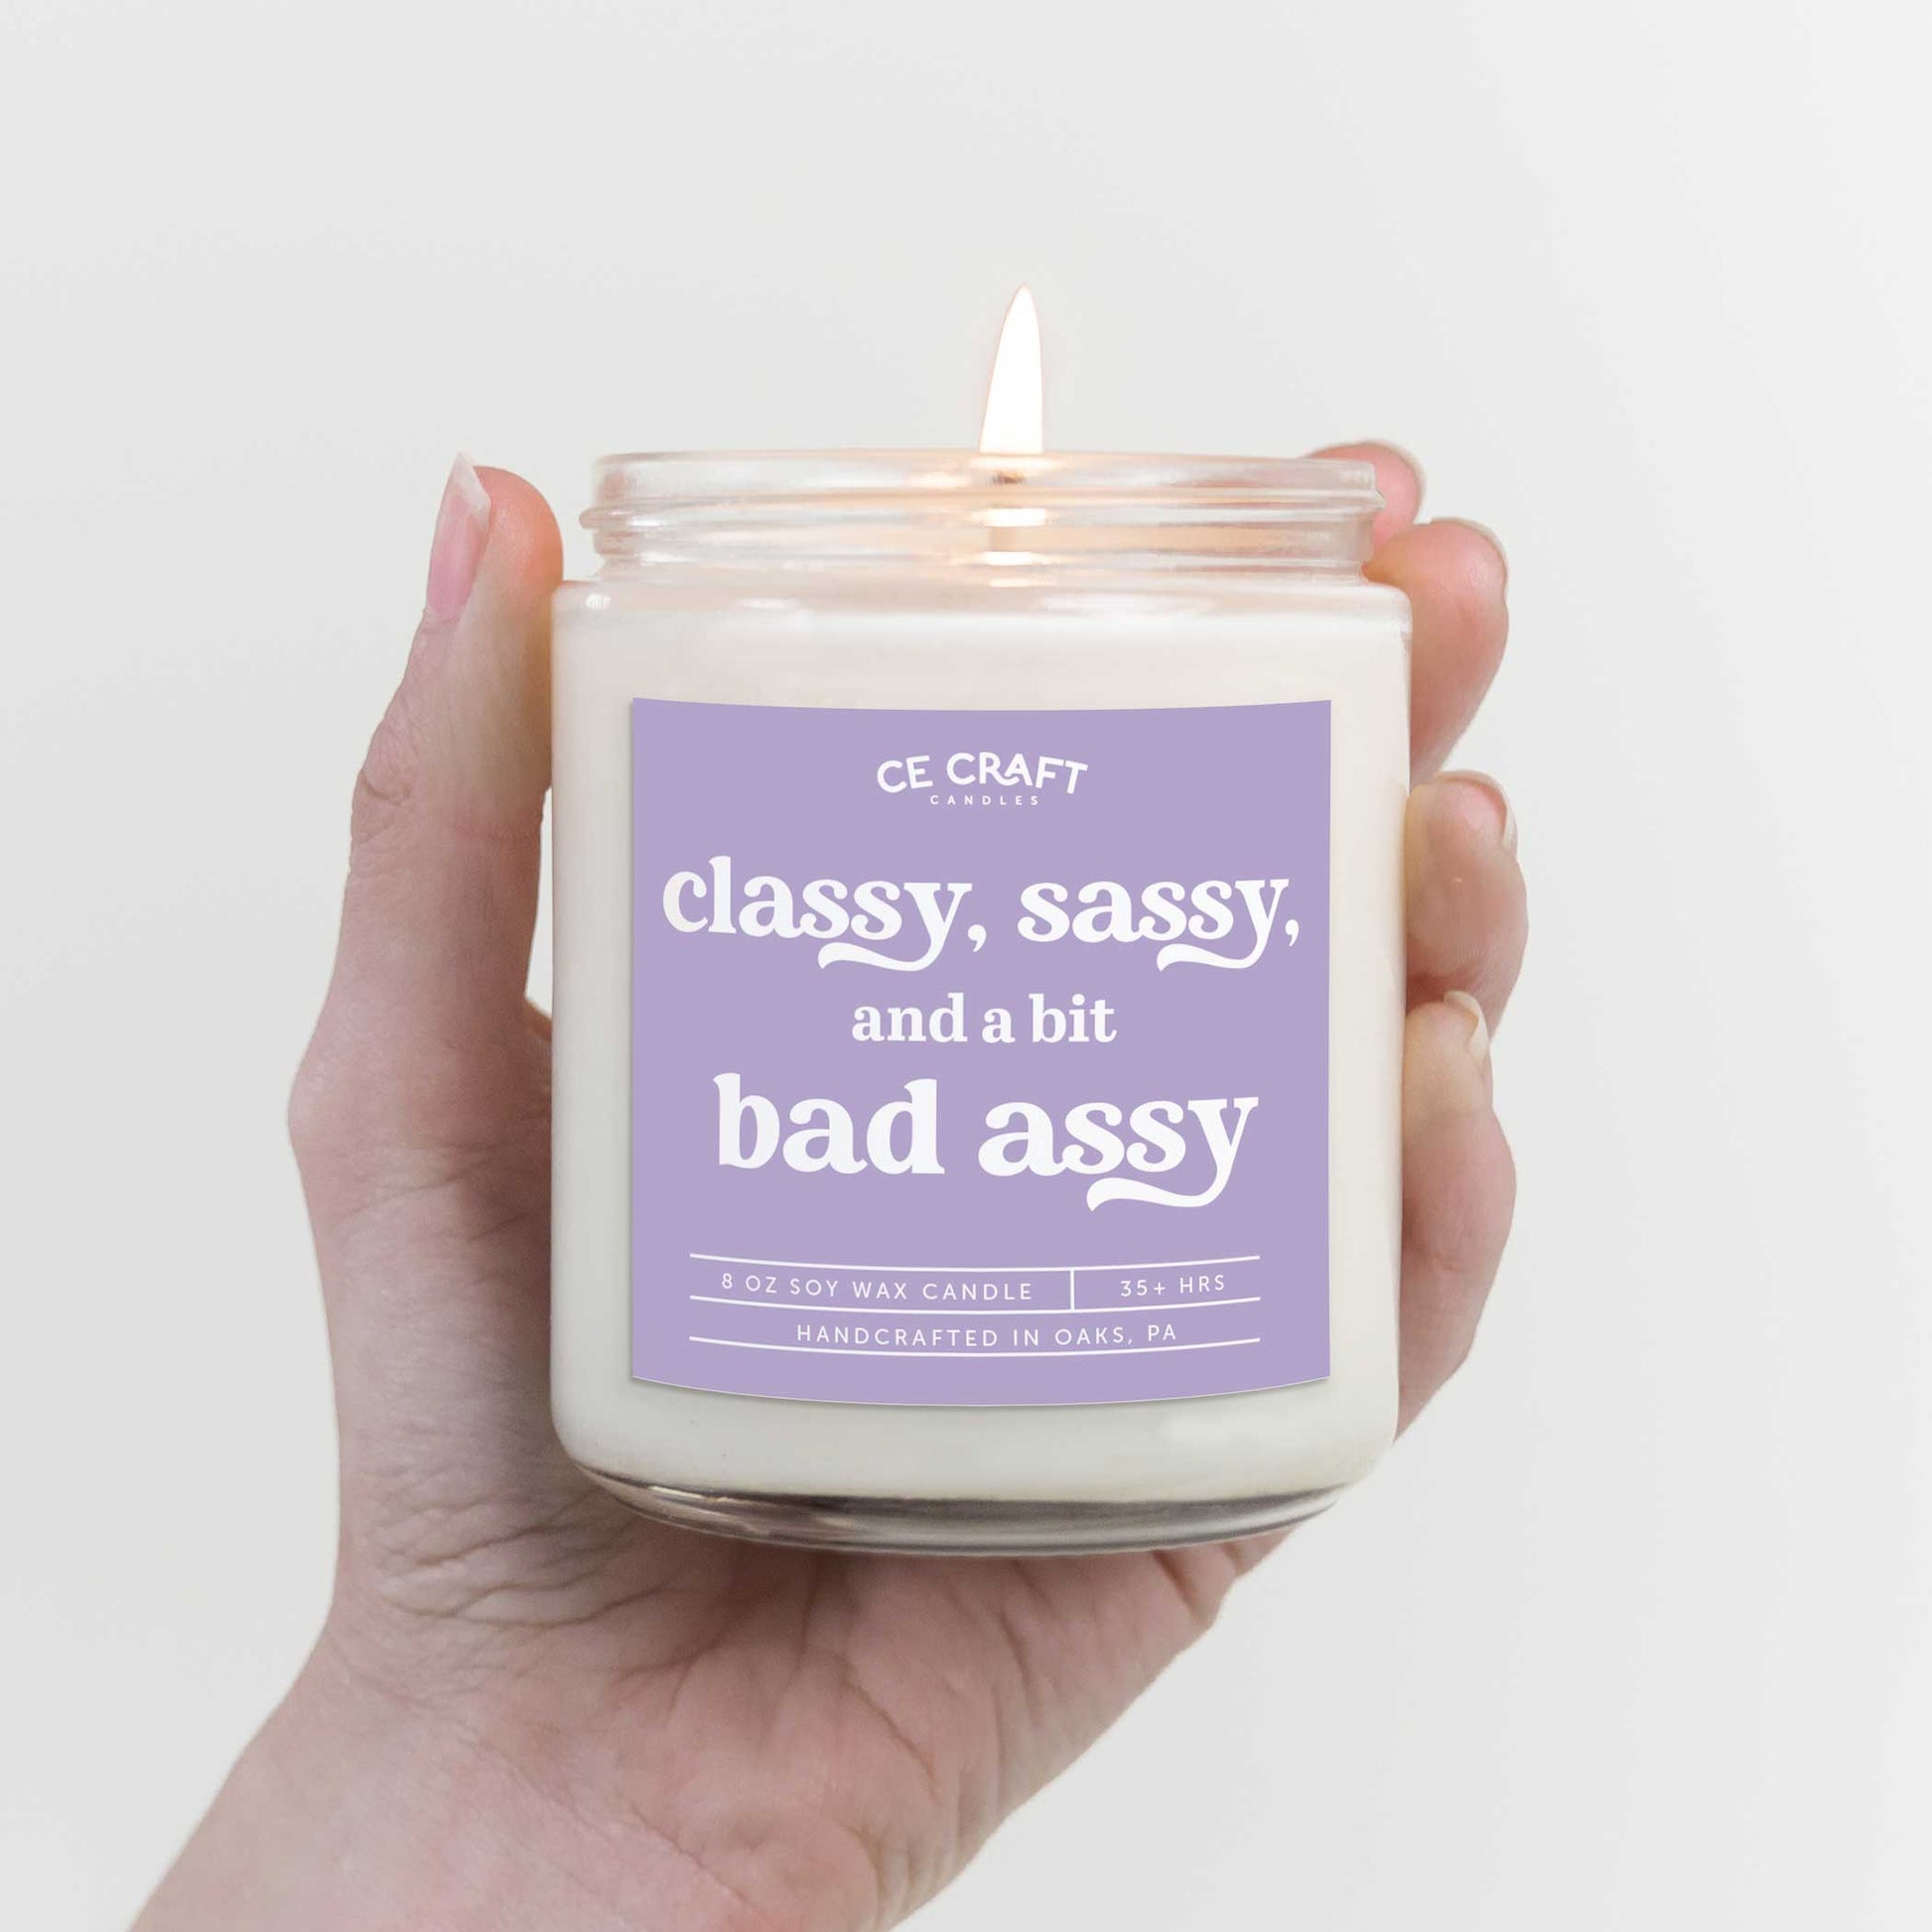 Funny Candles - Les Creme - When This Candle Is Lit, I Just Took A